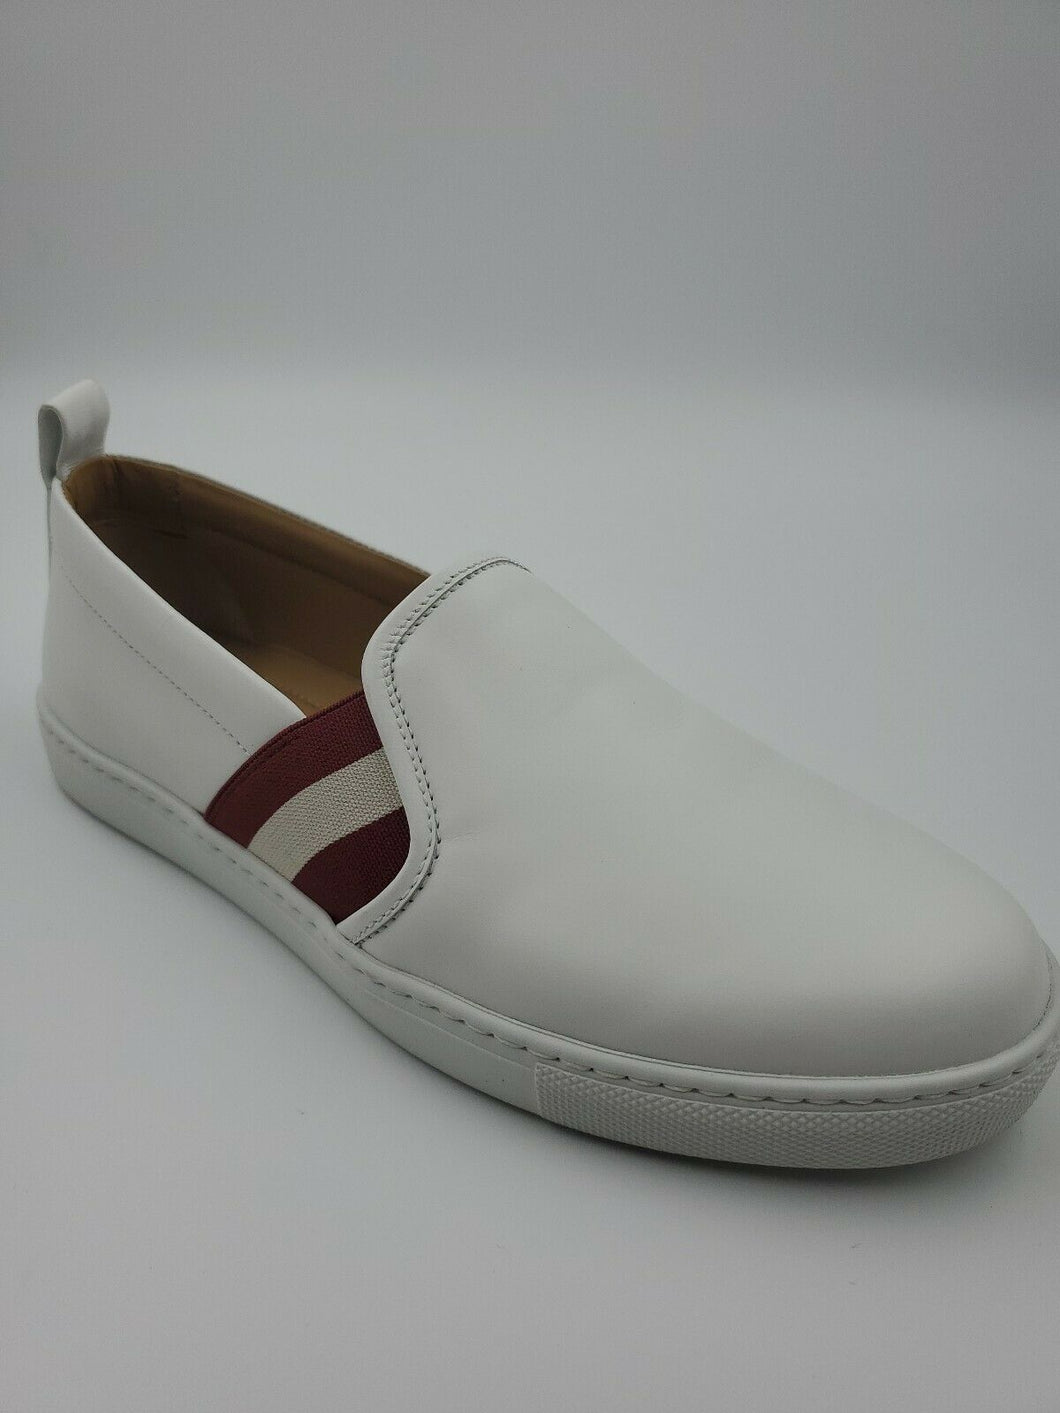 New Bally Women's Henrika White Calf Leather Slip On Sneakers Italy US 4.5 MSRP $450